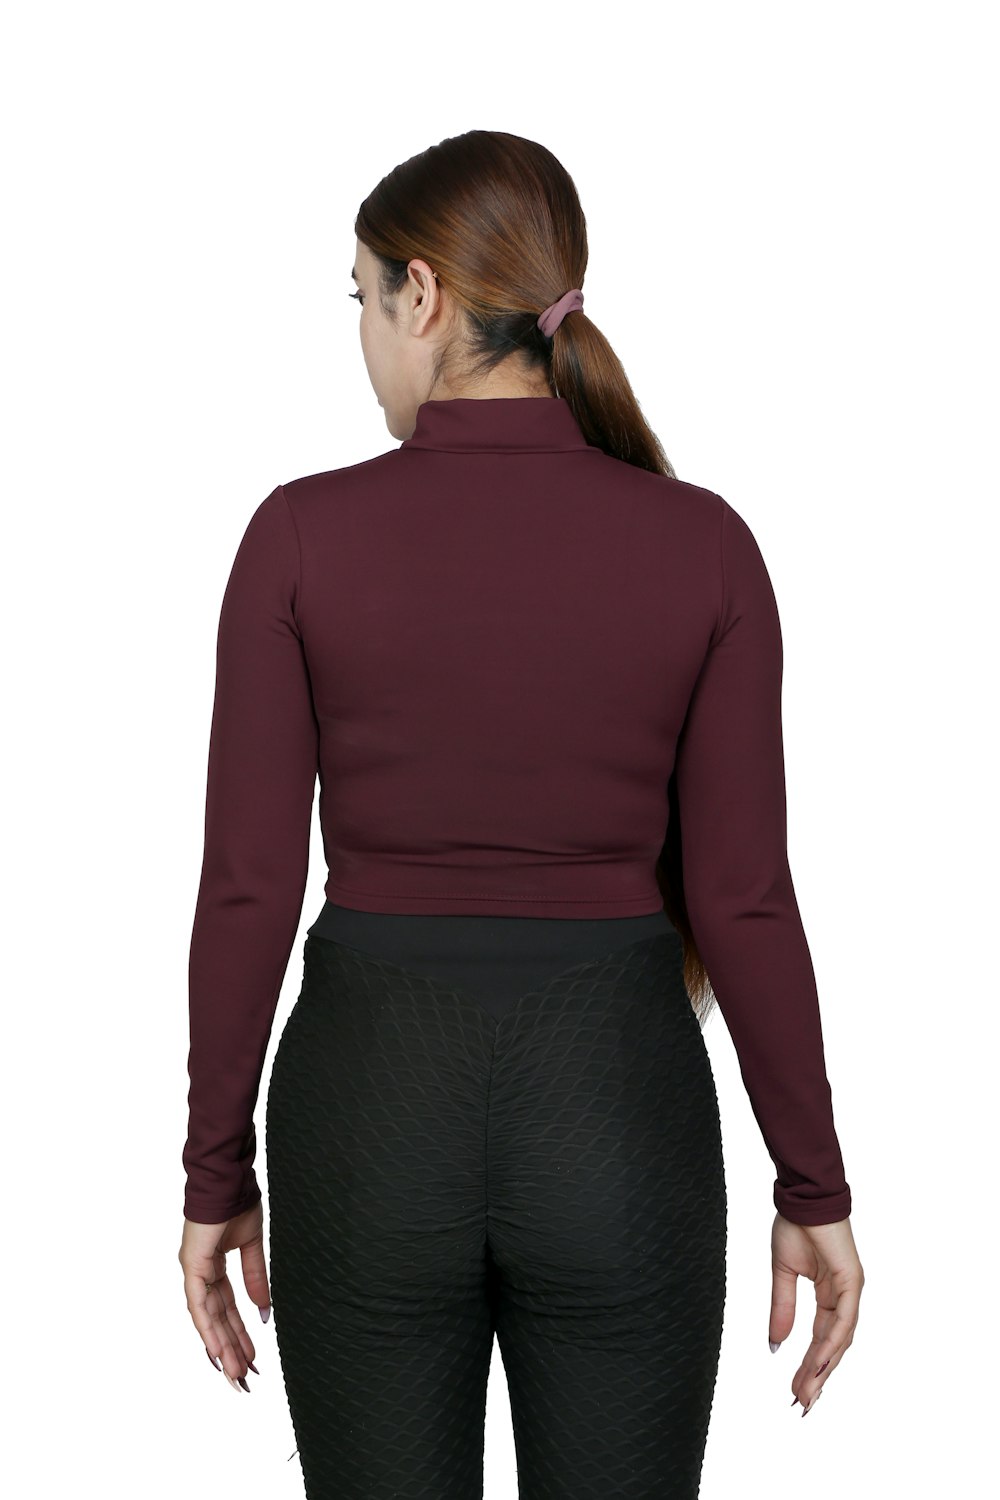 a woman wearing a maroon top and black pants